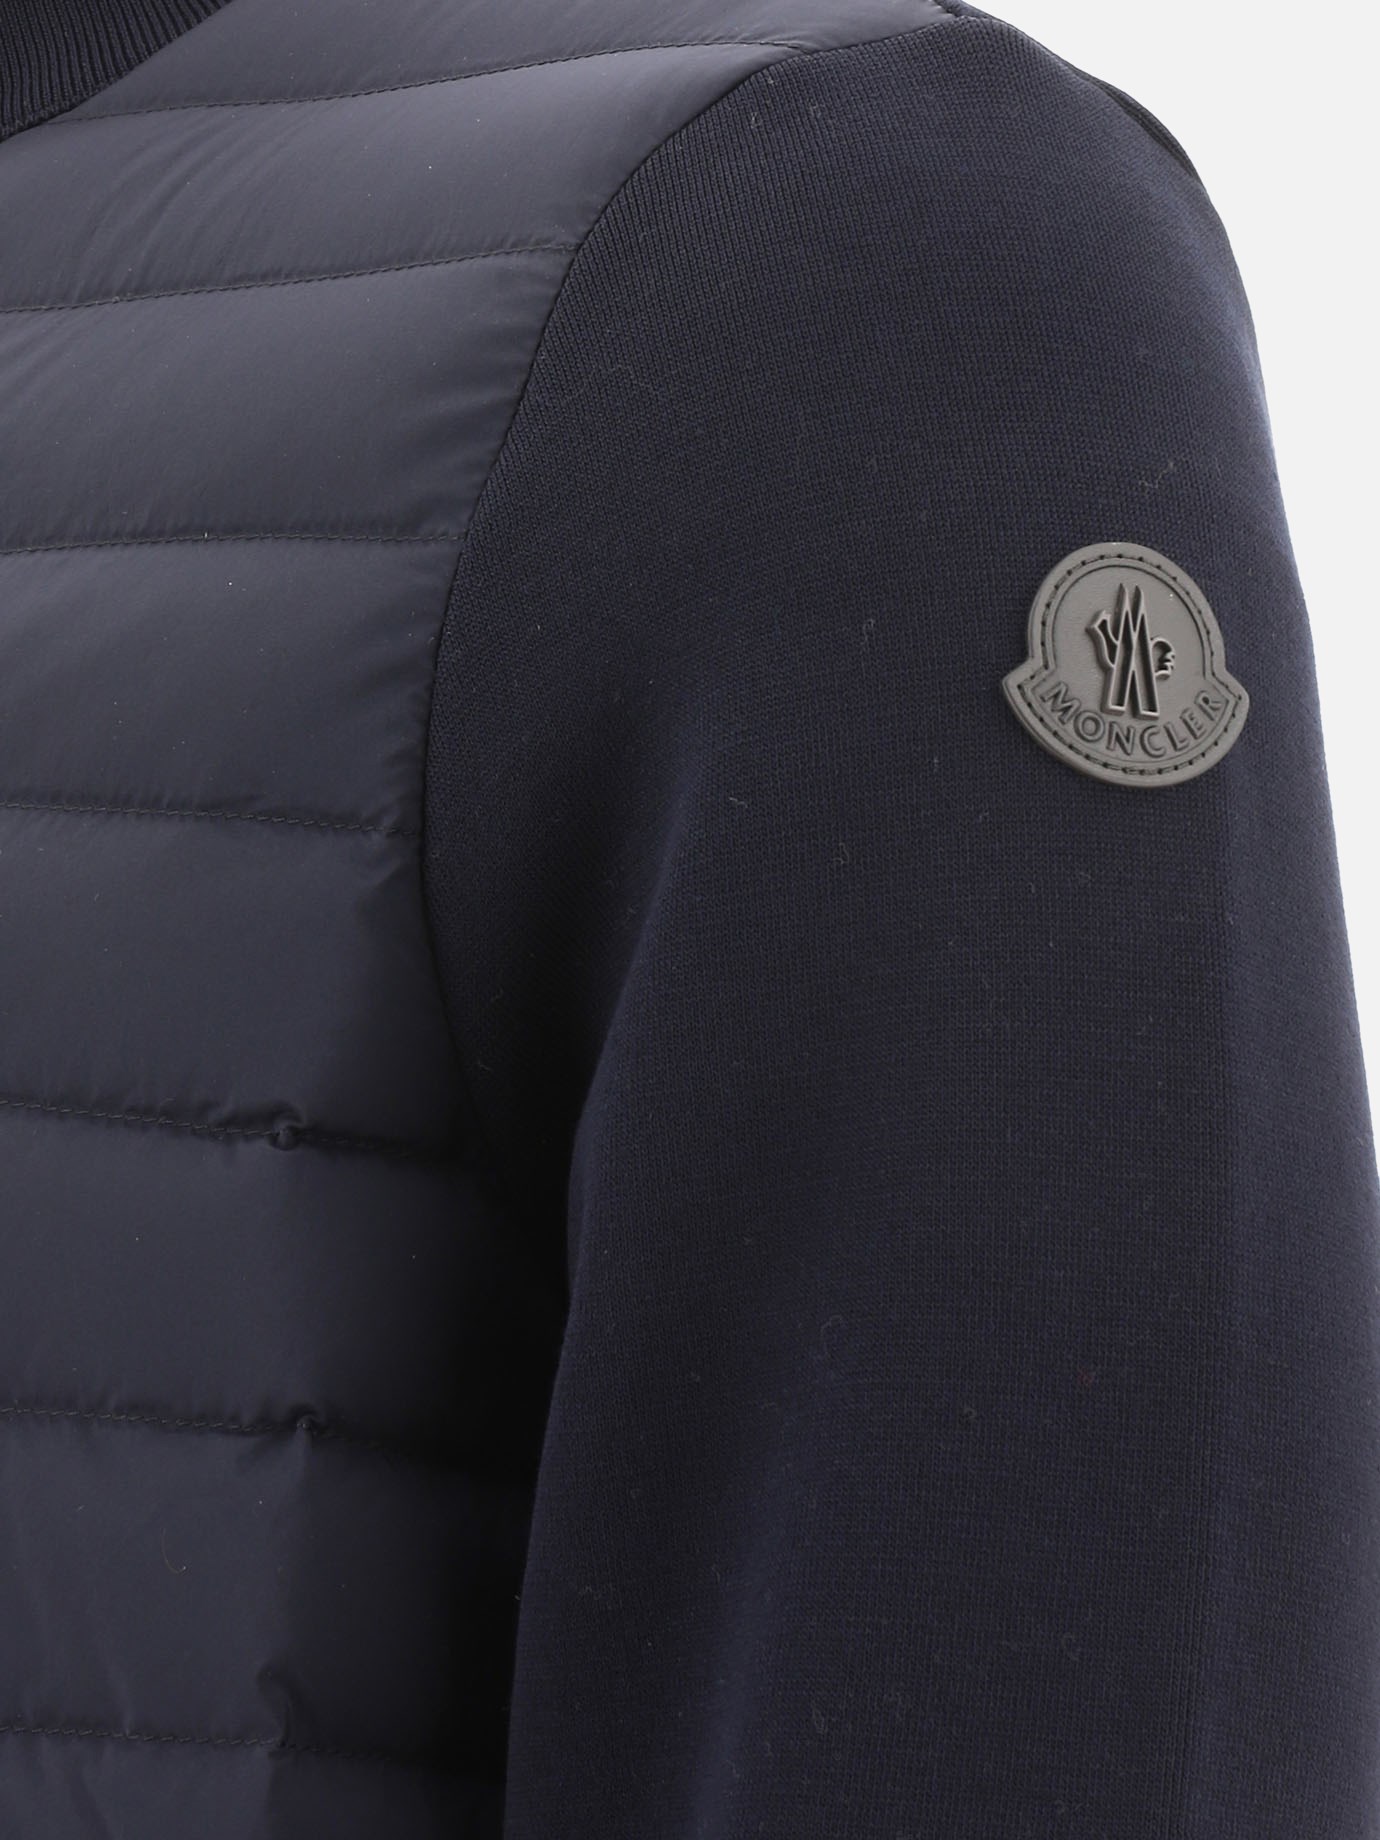 Tricot down jacket by Moncler